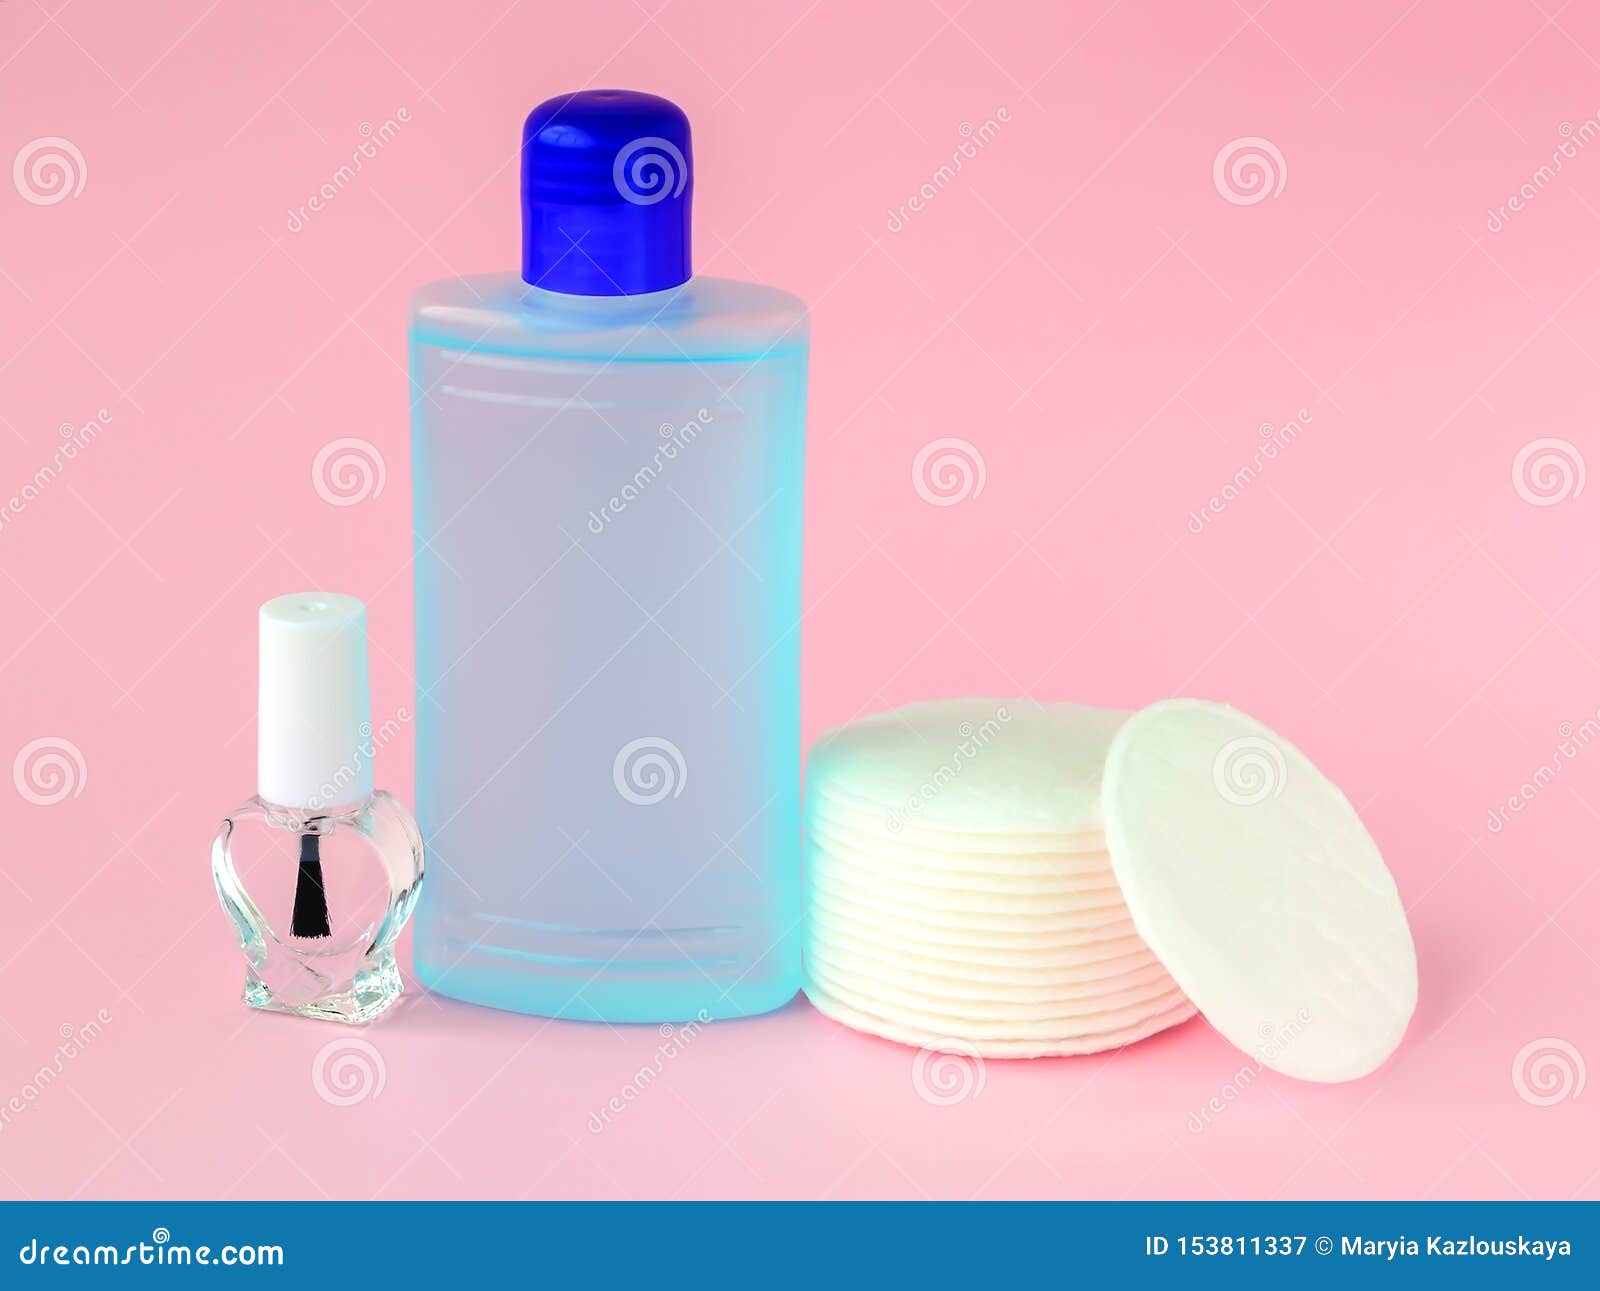 Glass Bottle with Colorless Nail Polish, Plastic Bottle with Nail Varnish  Remover and Cotton Pads on a Pastel Pink Background. Stock Image - Image of  group, cleansing: 153811337